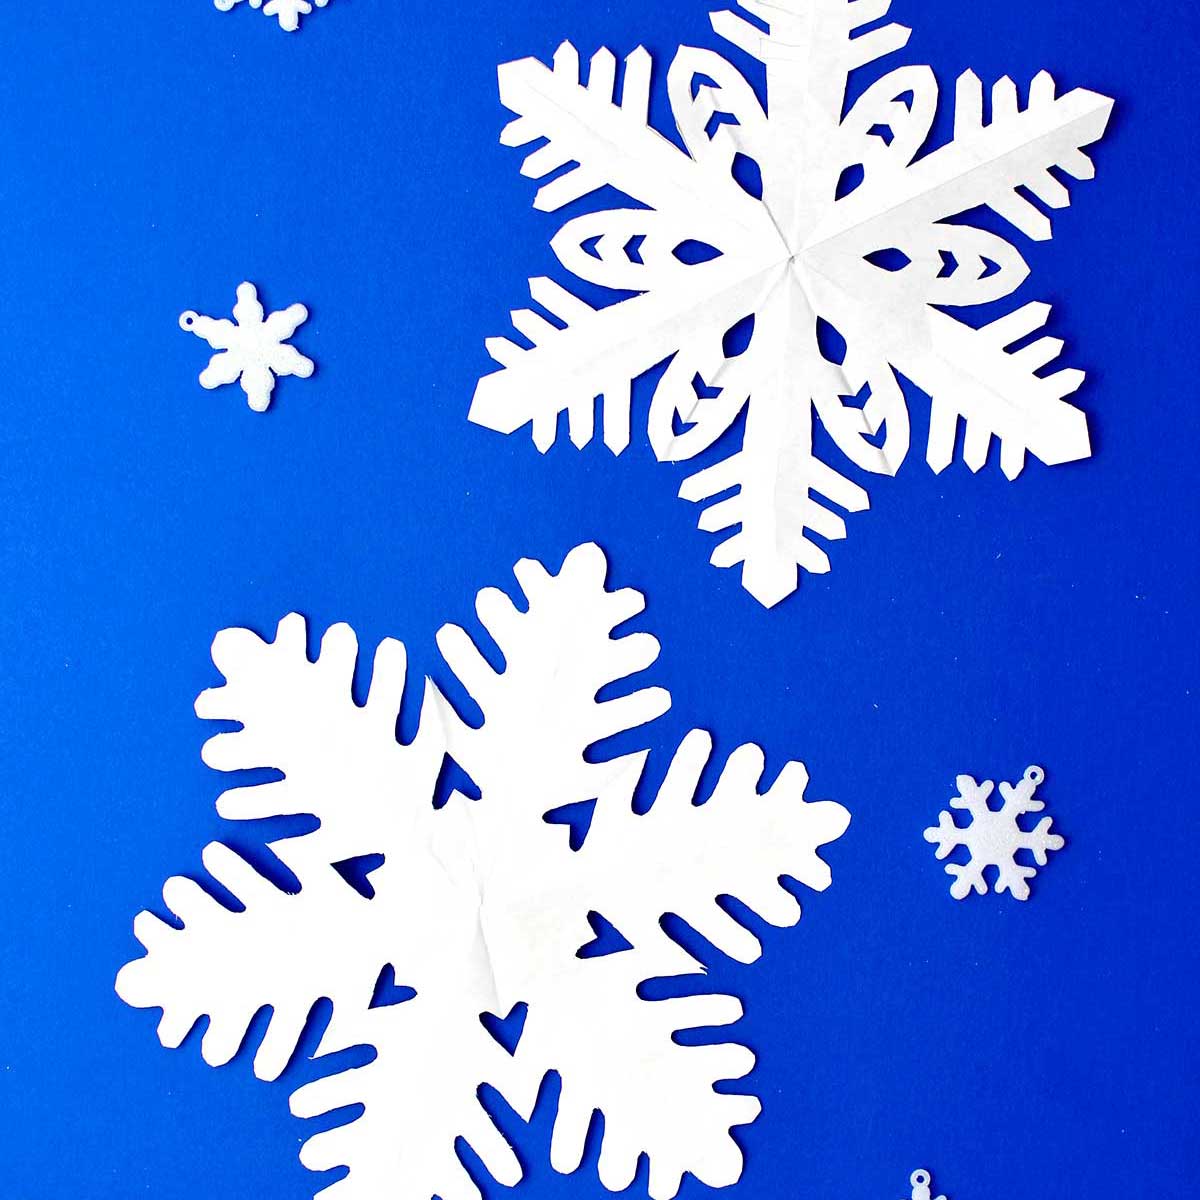 Two completed snowflakes made from white paper resting on blue background.